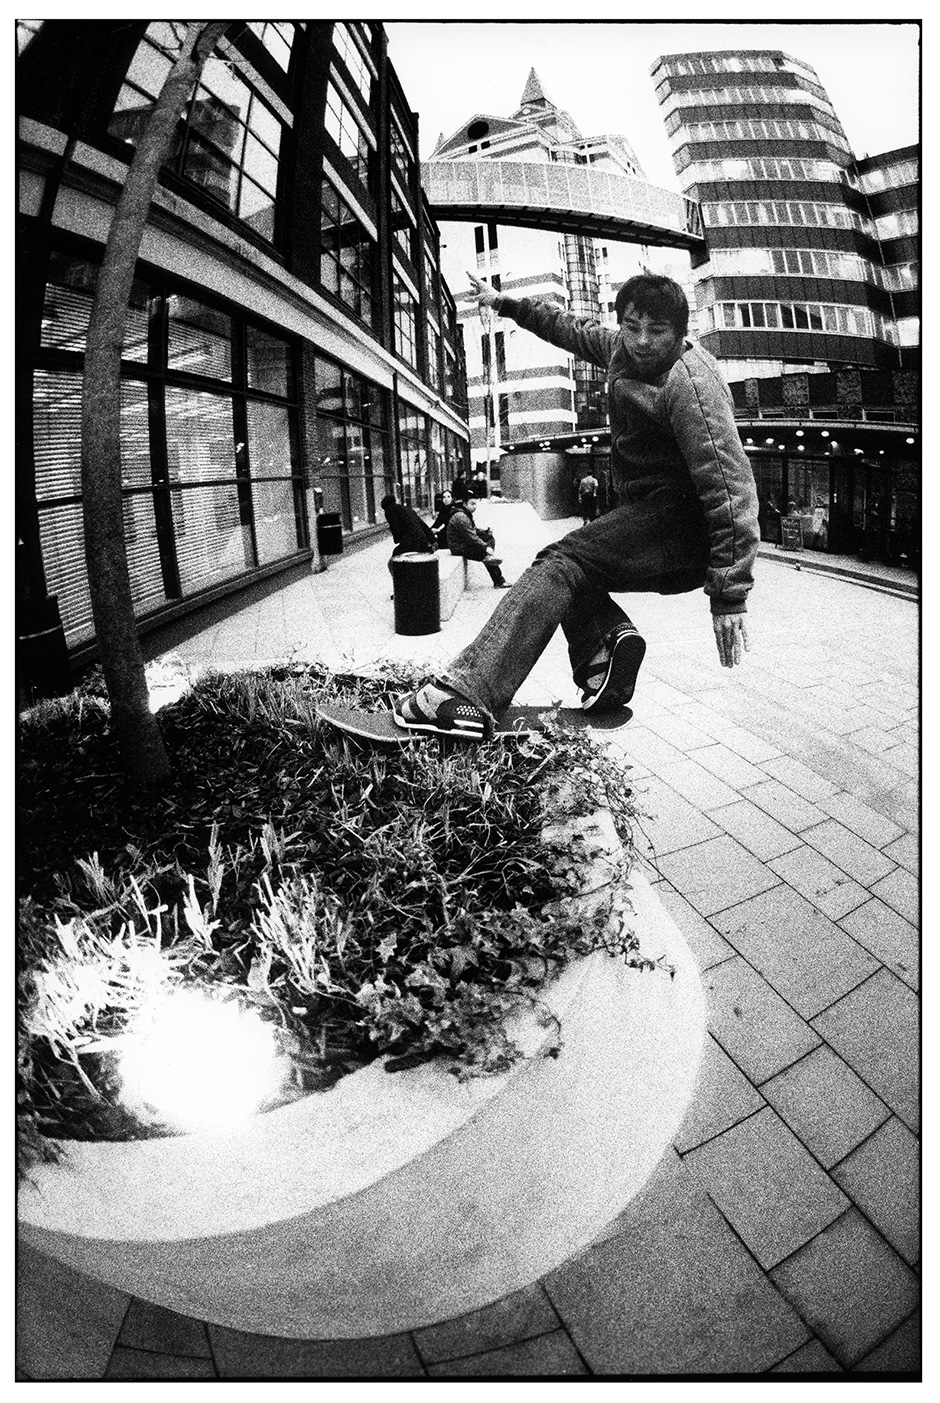 Olly Todd dipping his frontside rock into some foliage in 2003. Benjamin Deberdt's London – An Interview – Slam City Skates